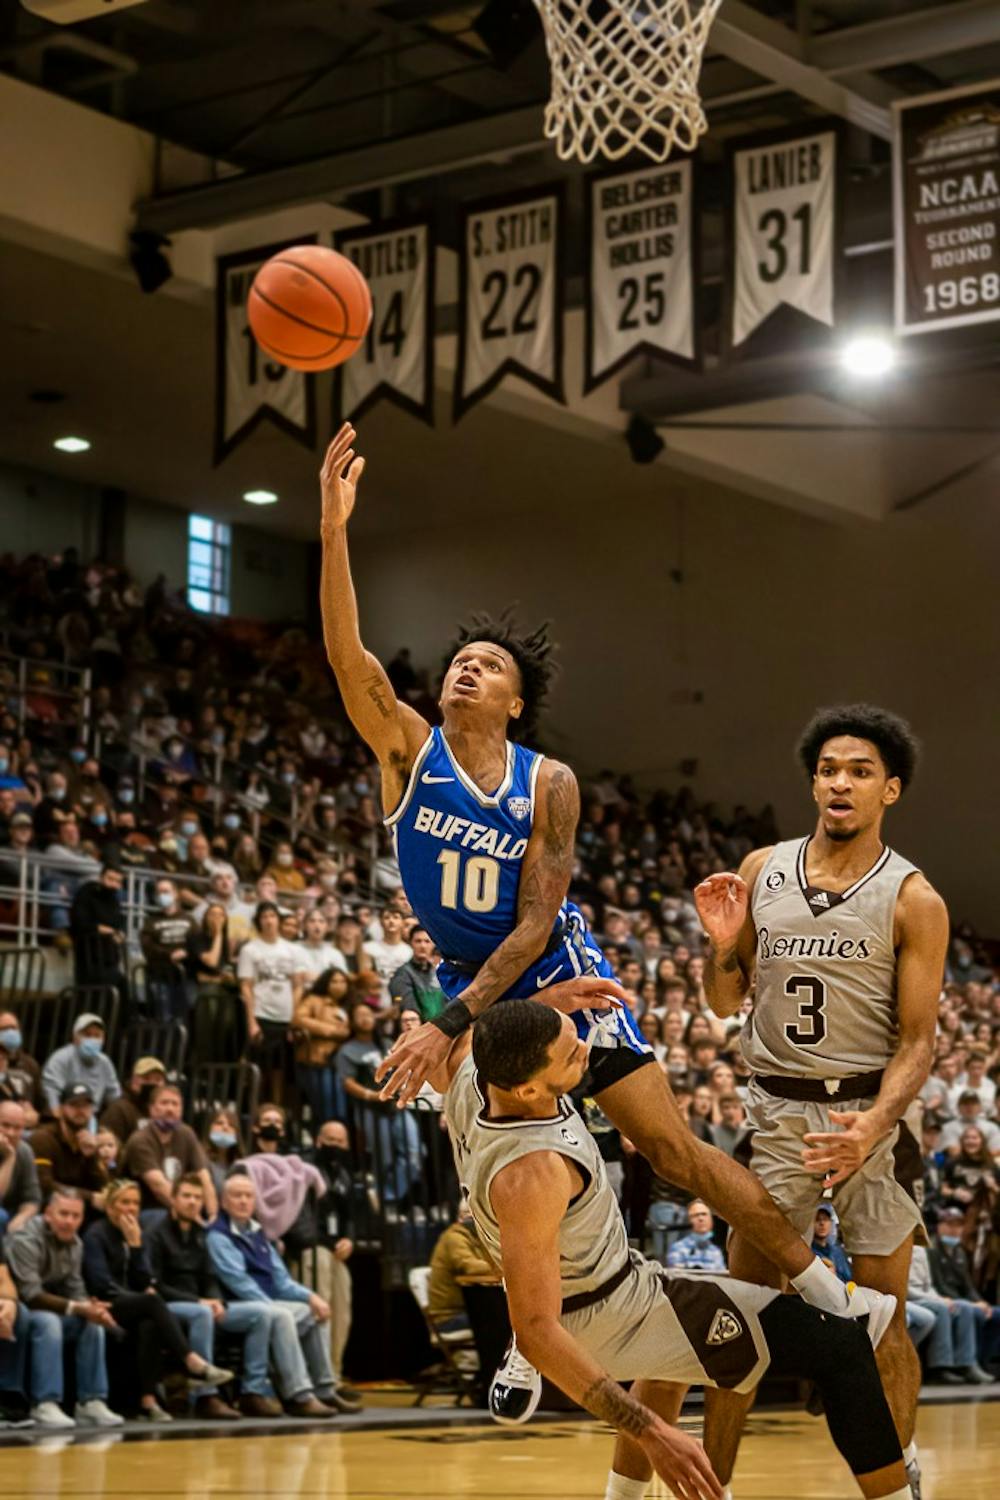  Senior guard Ronaldo Segu (10) goes up for a shot during UB’s 68-65 loss to St. Bonaventure at the Reilly Center Saturday.
